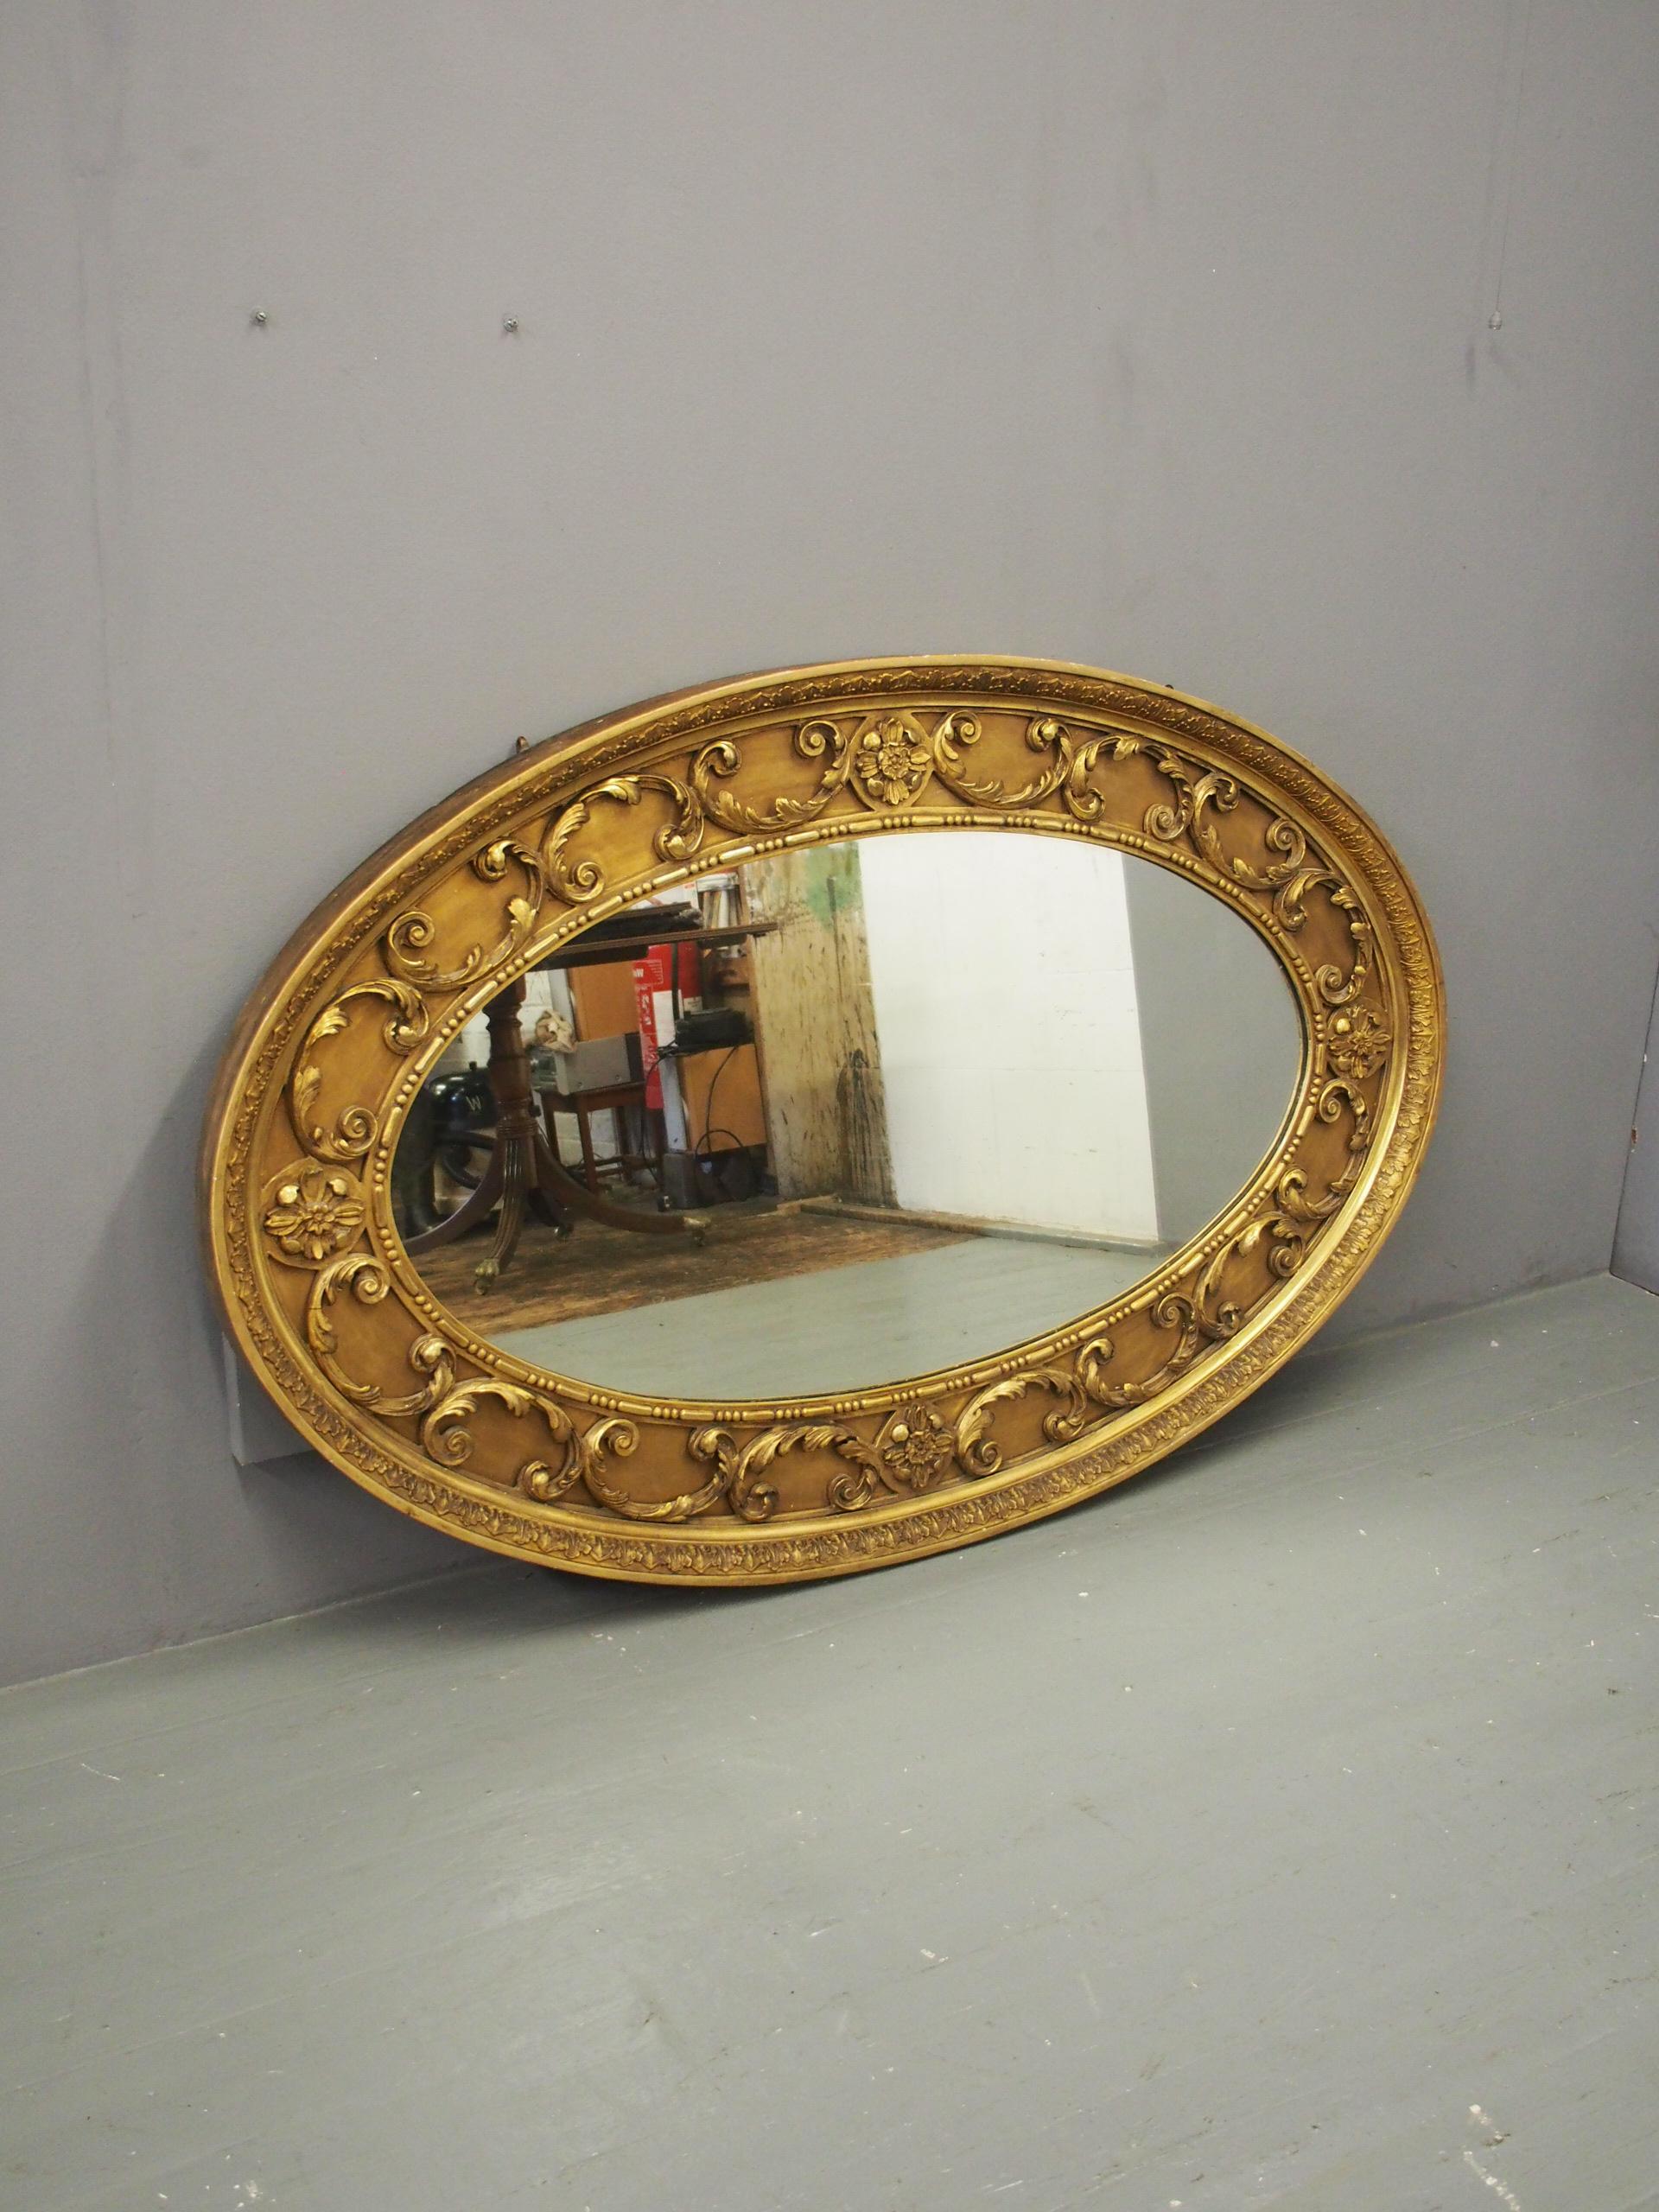 Victorian carved giltwood and gesso oval mirror, circa 1860. The giltwood frame has a foliate gesso pattern to the outside with carved, gilded C-scrolls intersected by large flower heads. Inside is an egg and dart carved, gilded border with its